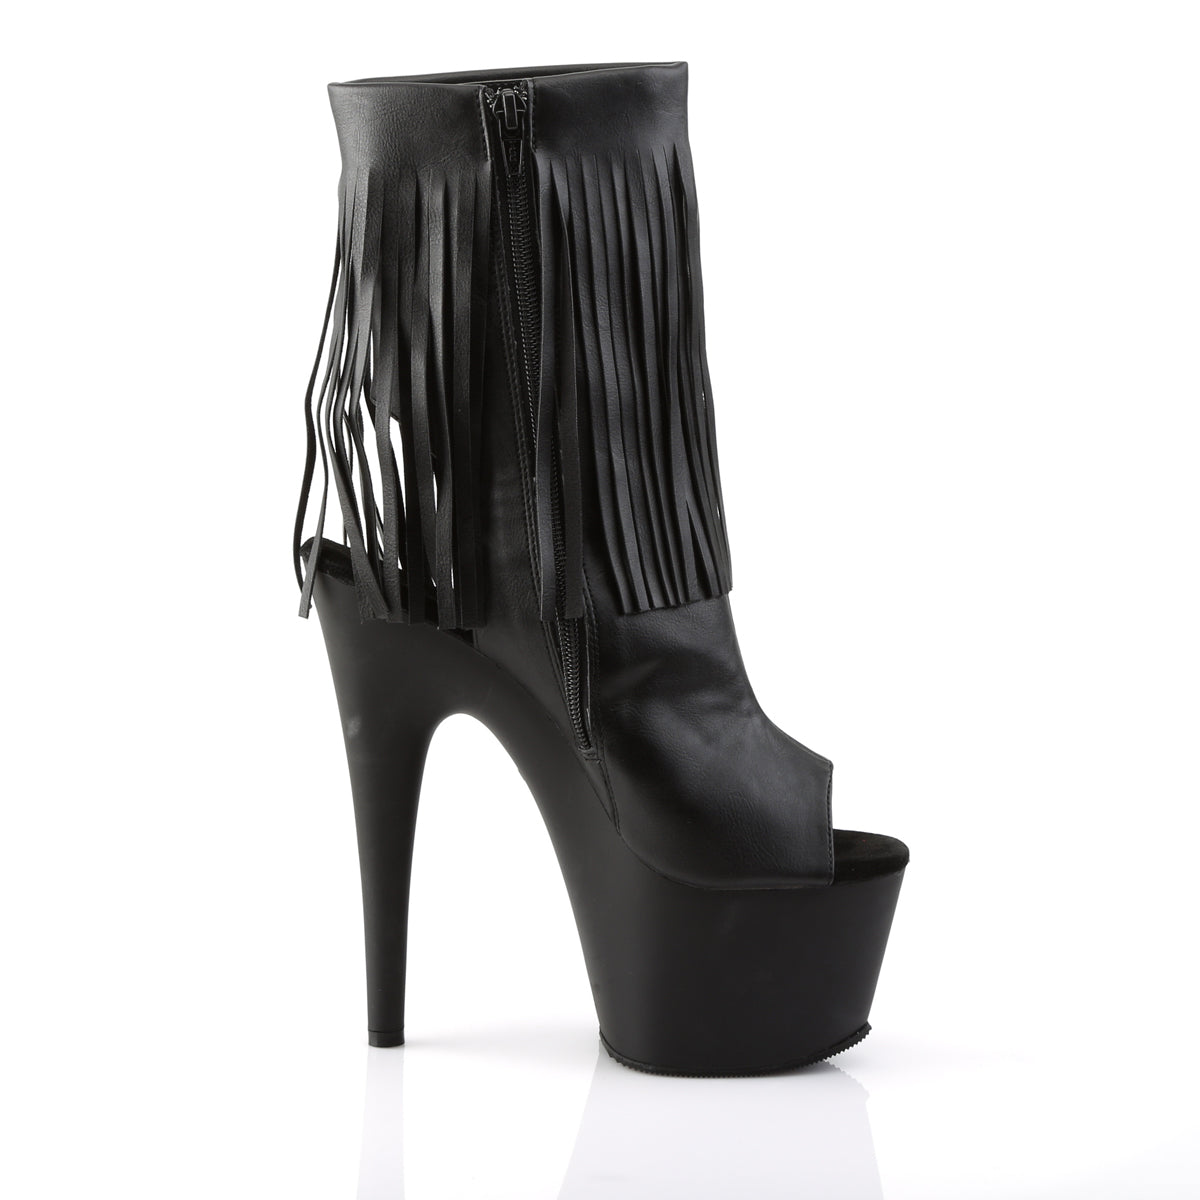 ADORE-1019 Pleaser 7" Heel Black Exotic Dancing Ankle Boots-Pleaser- Sexy Shoes Fetish Heels